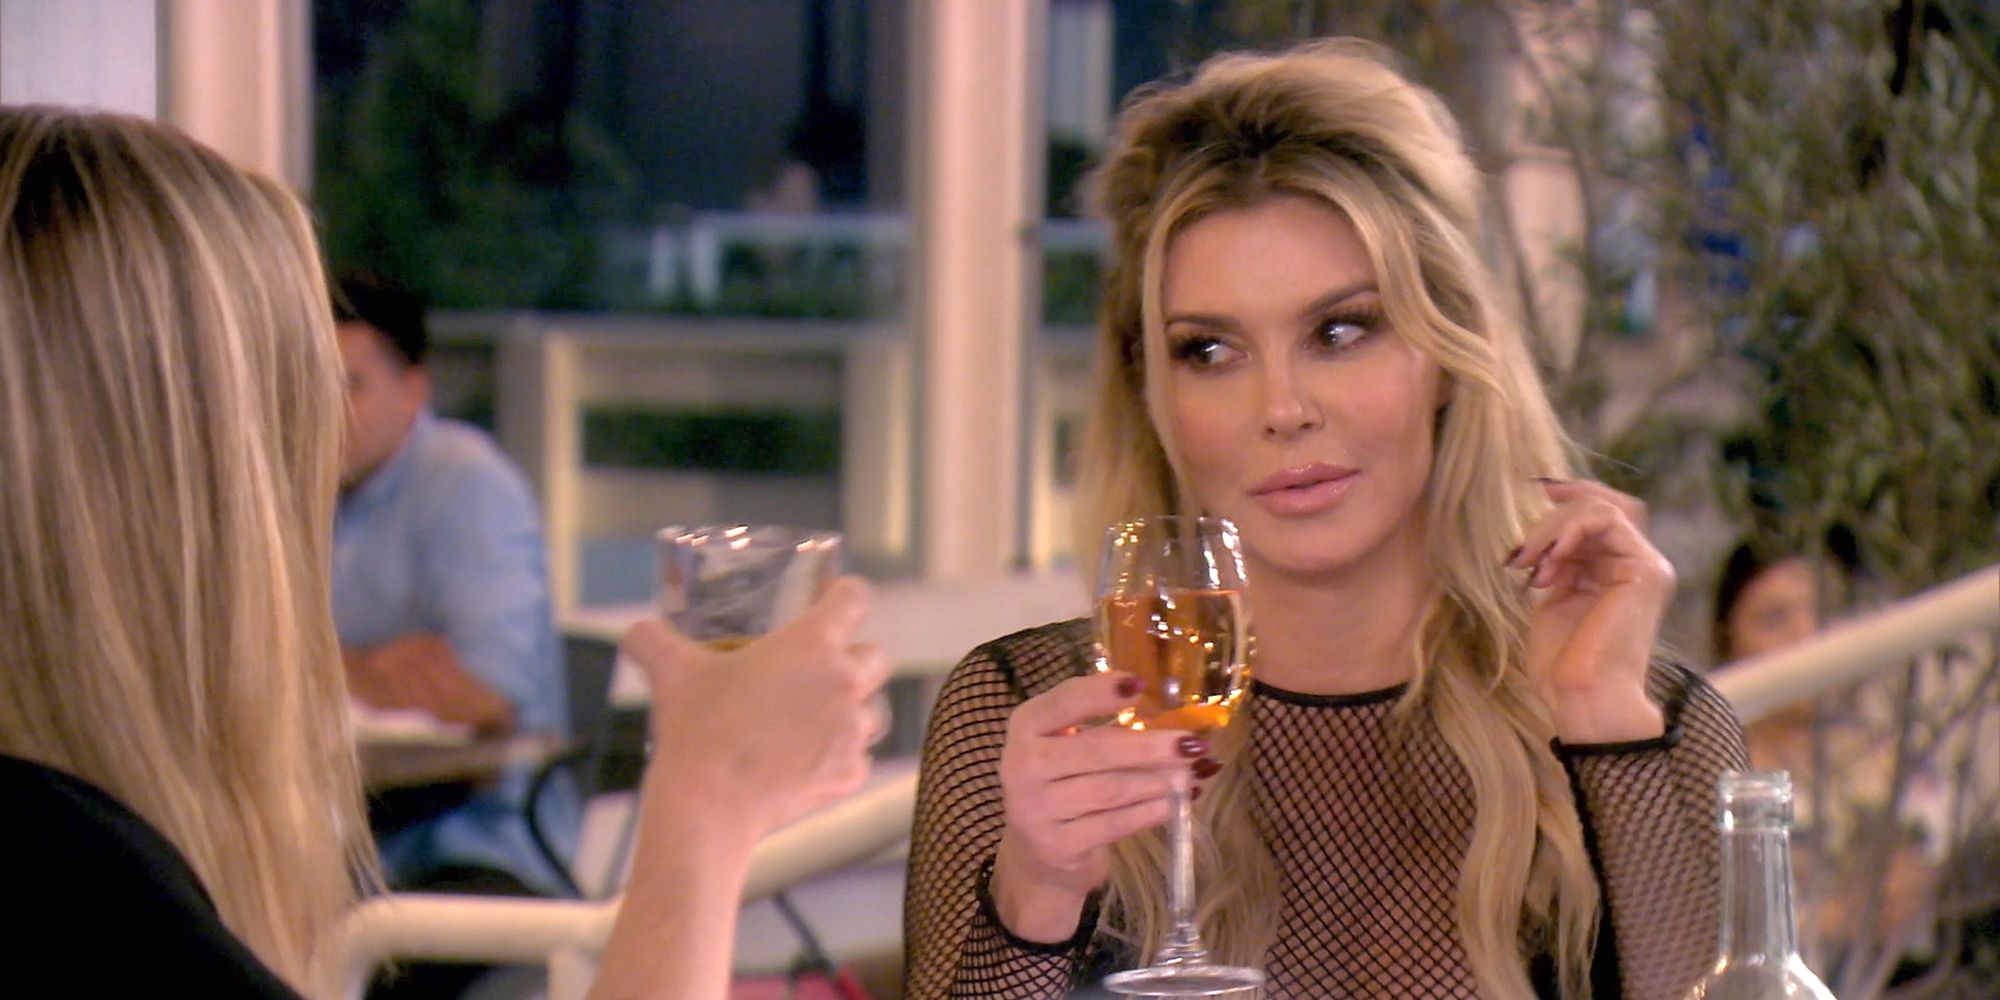 Brandi Glanville on Real Housewives